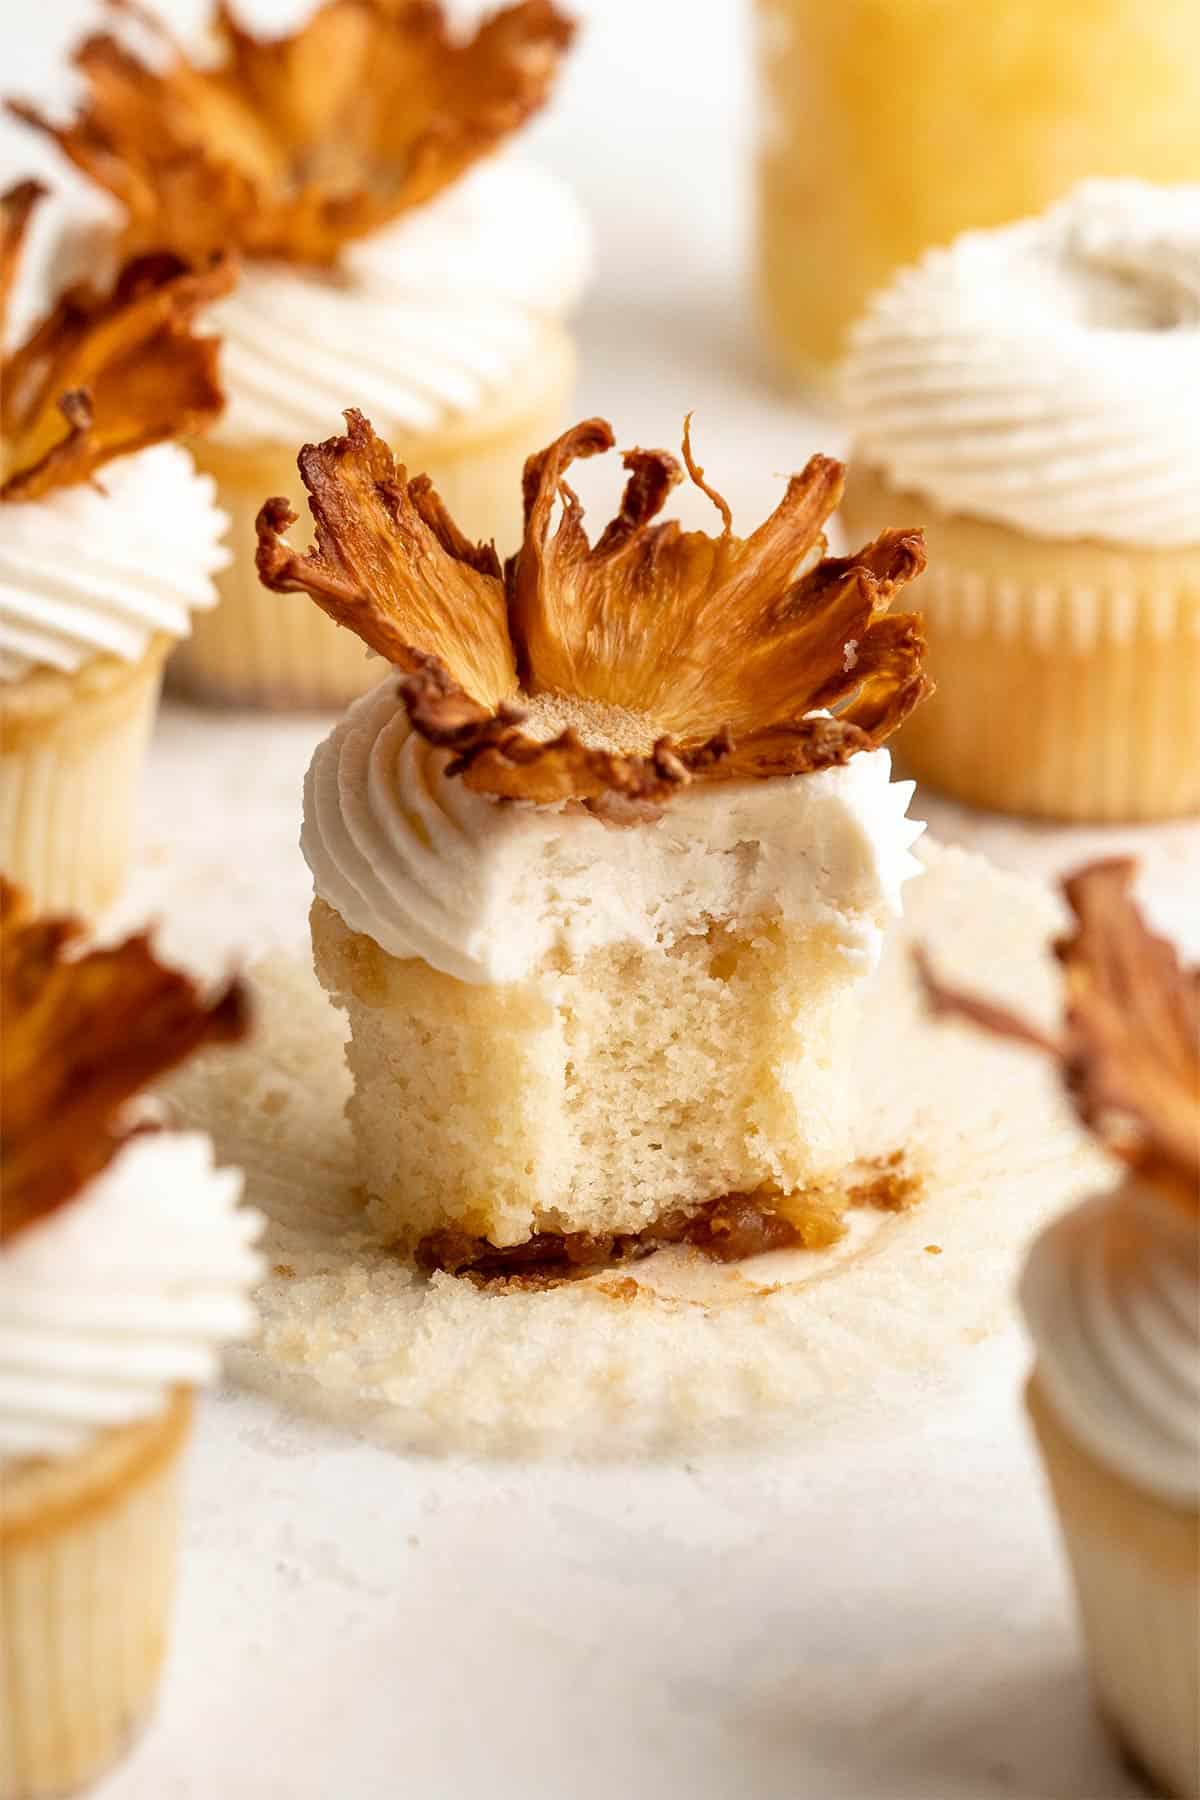 A pineapple upside down cupcake sitting on a piece of paper towel with three others in the background.